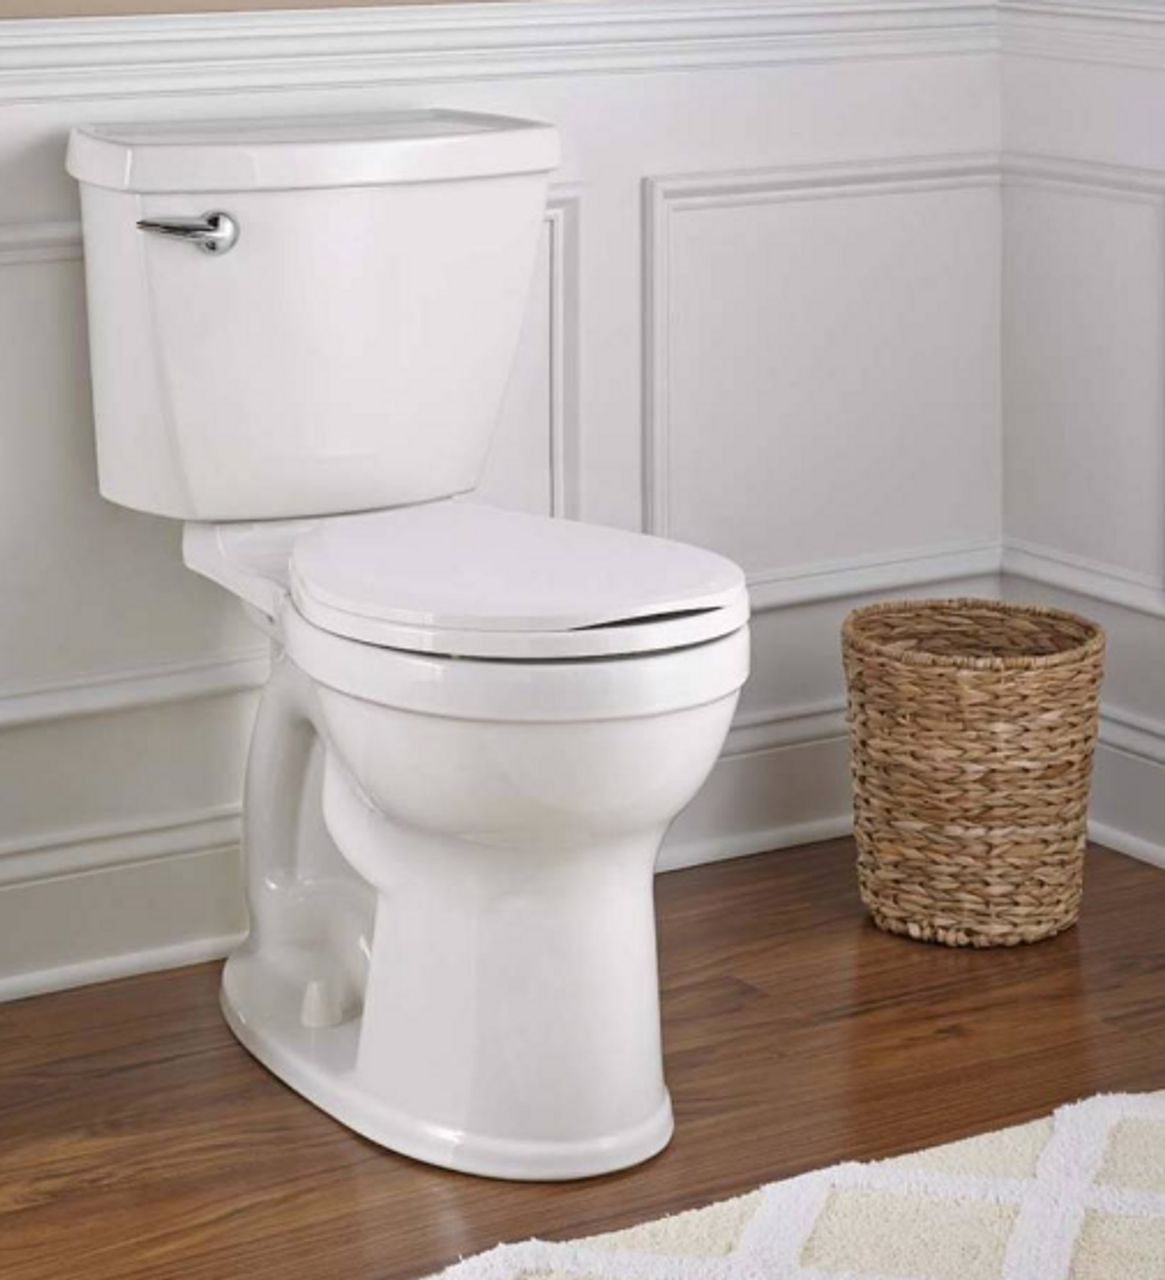 American Standard: Champion PRO Right Height Round Front gpf Toilet - Right Hand Trip Royal Place